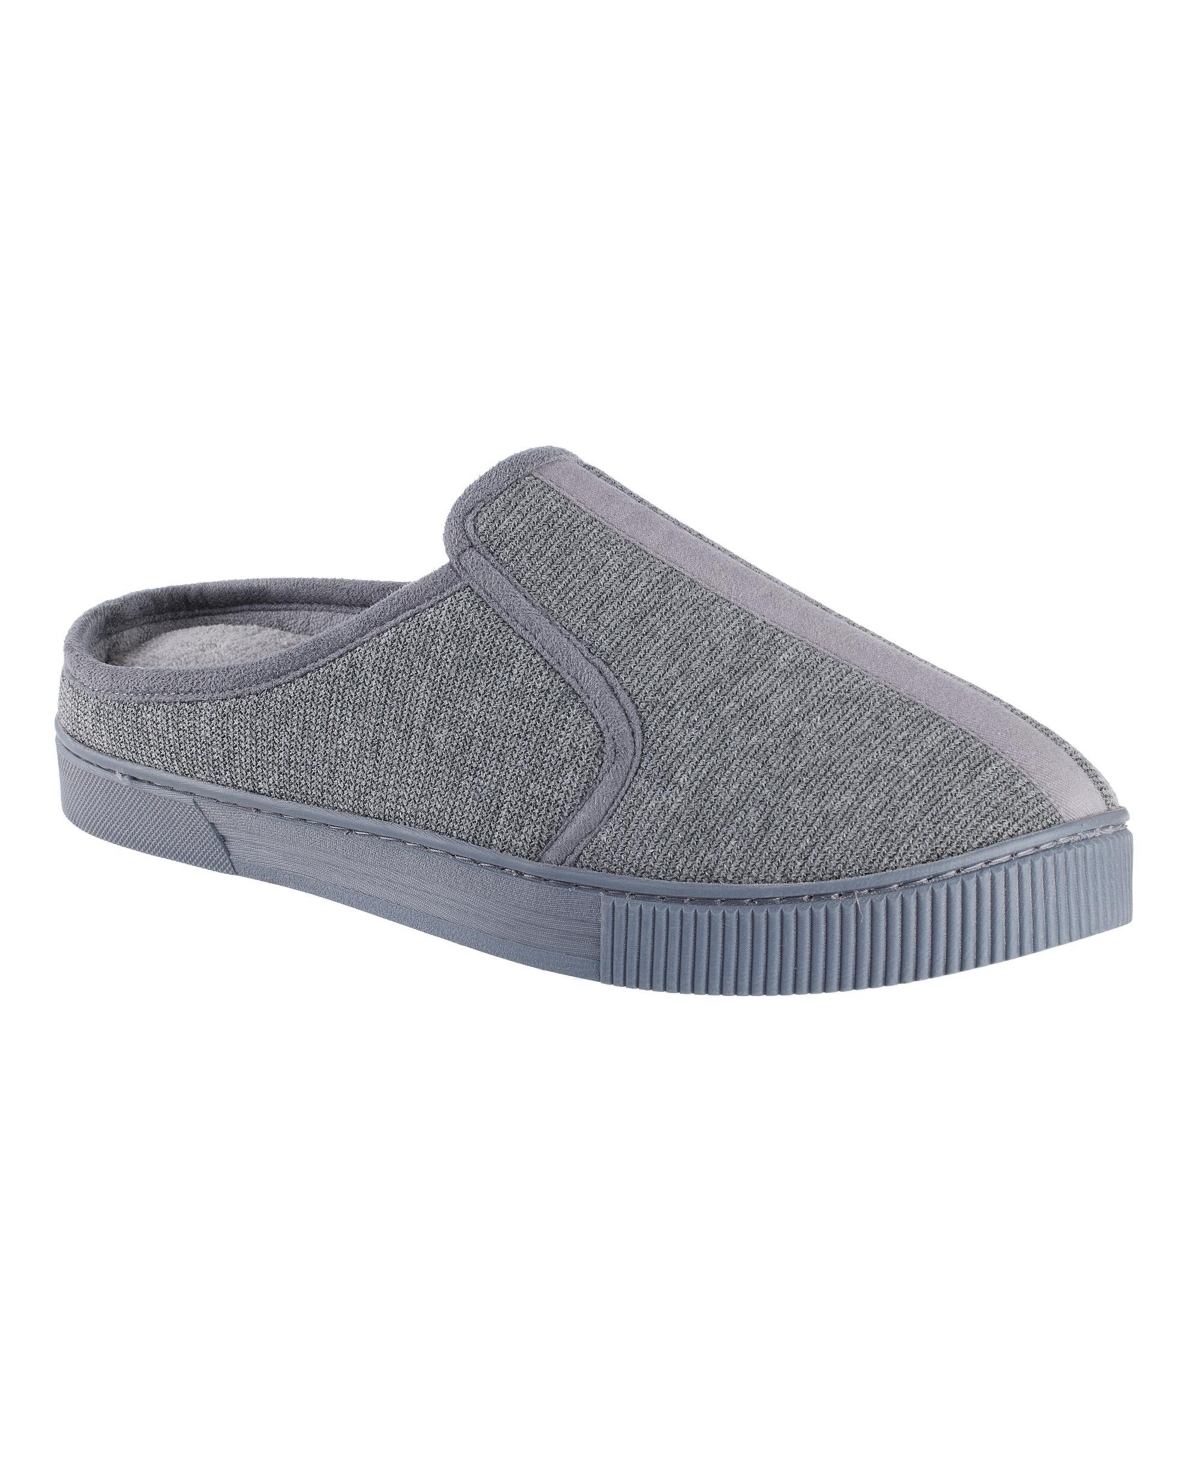 Men's Textured Knit Kai Clog Slippers with Gel-Infused Memory Foam - Dark Charcoal Heather